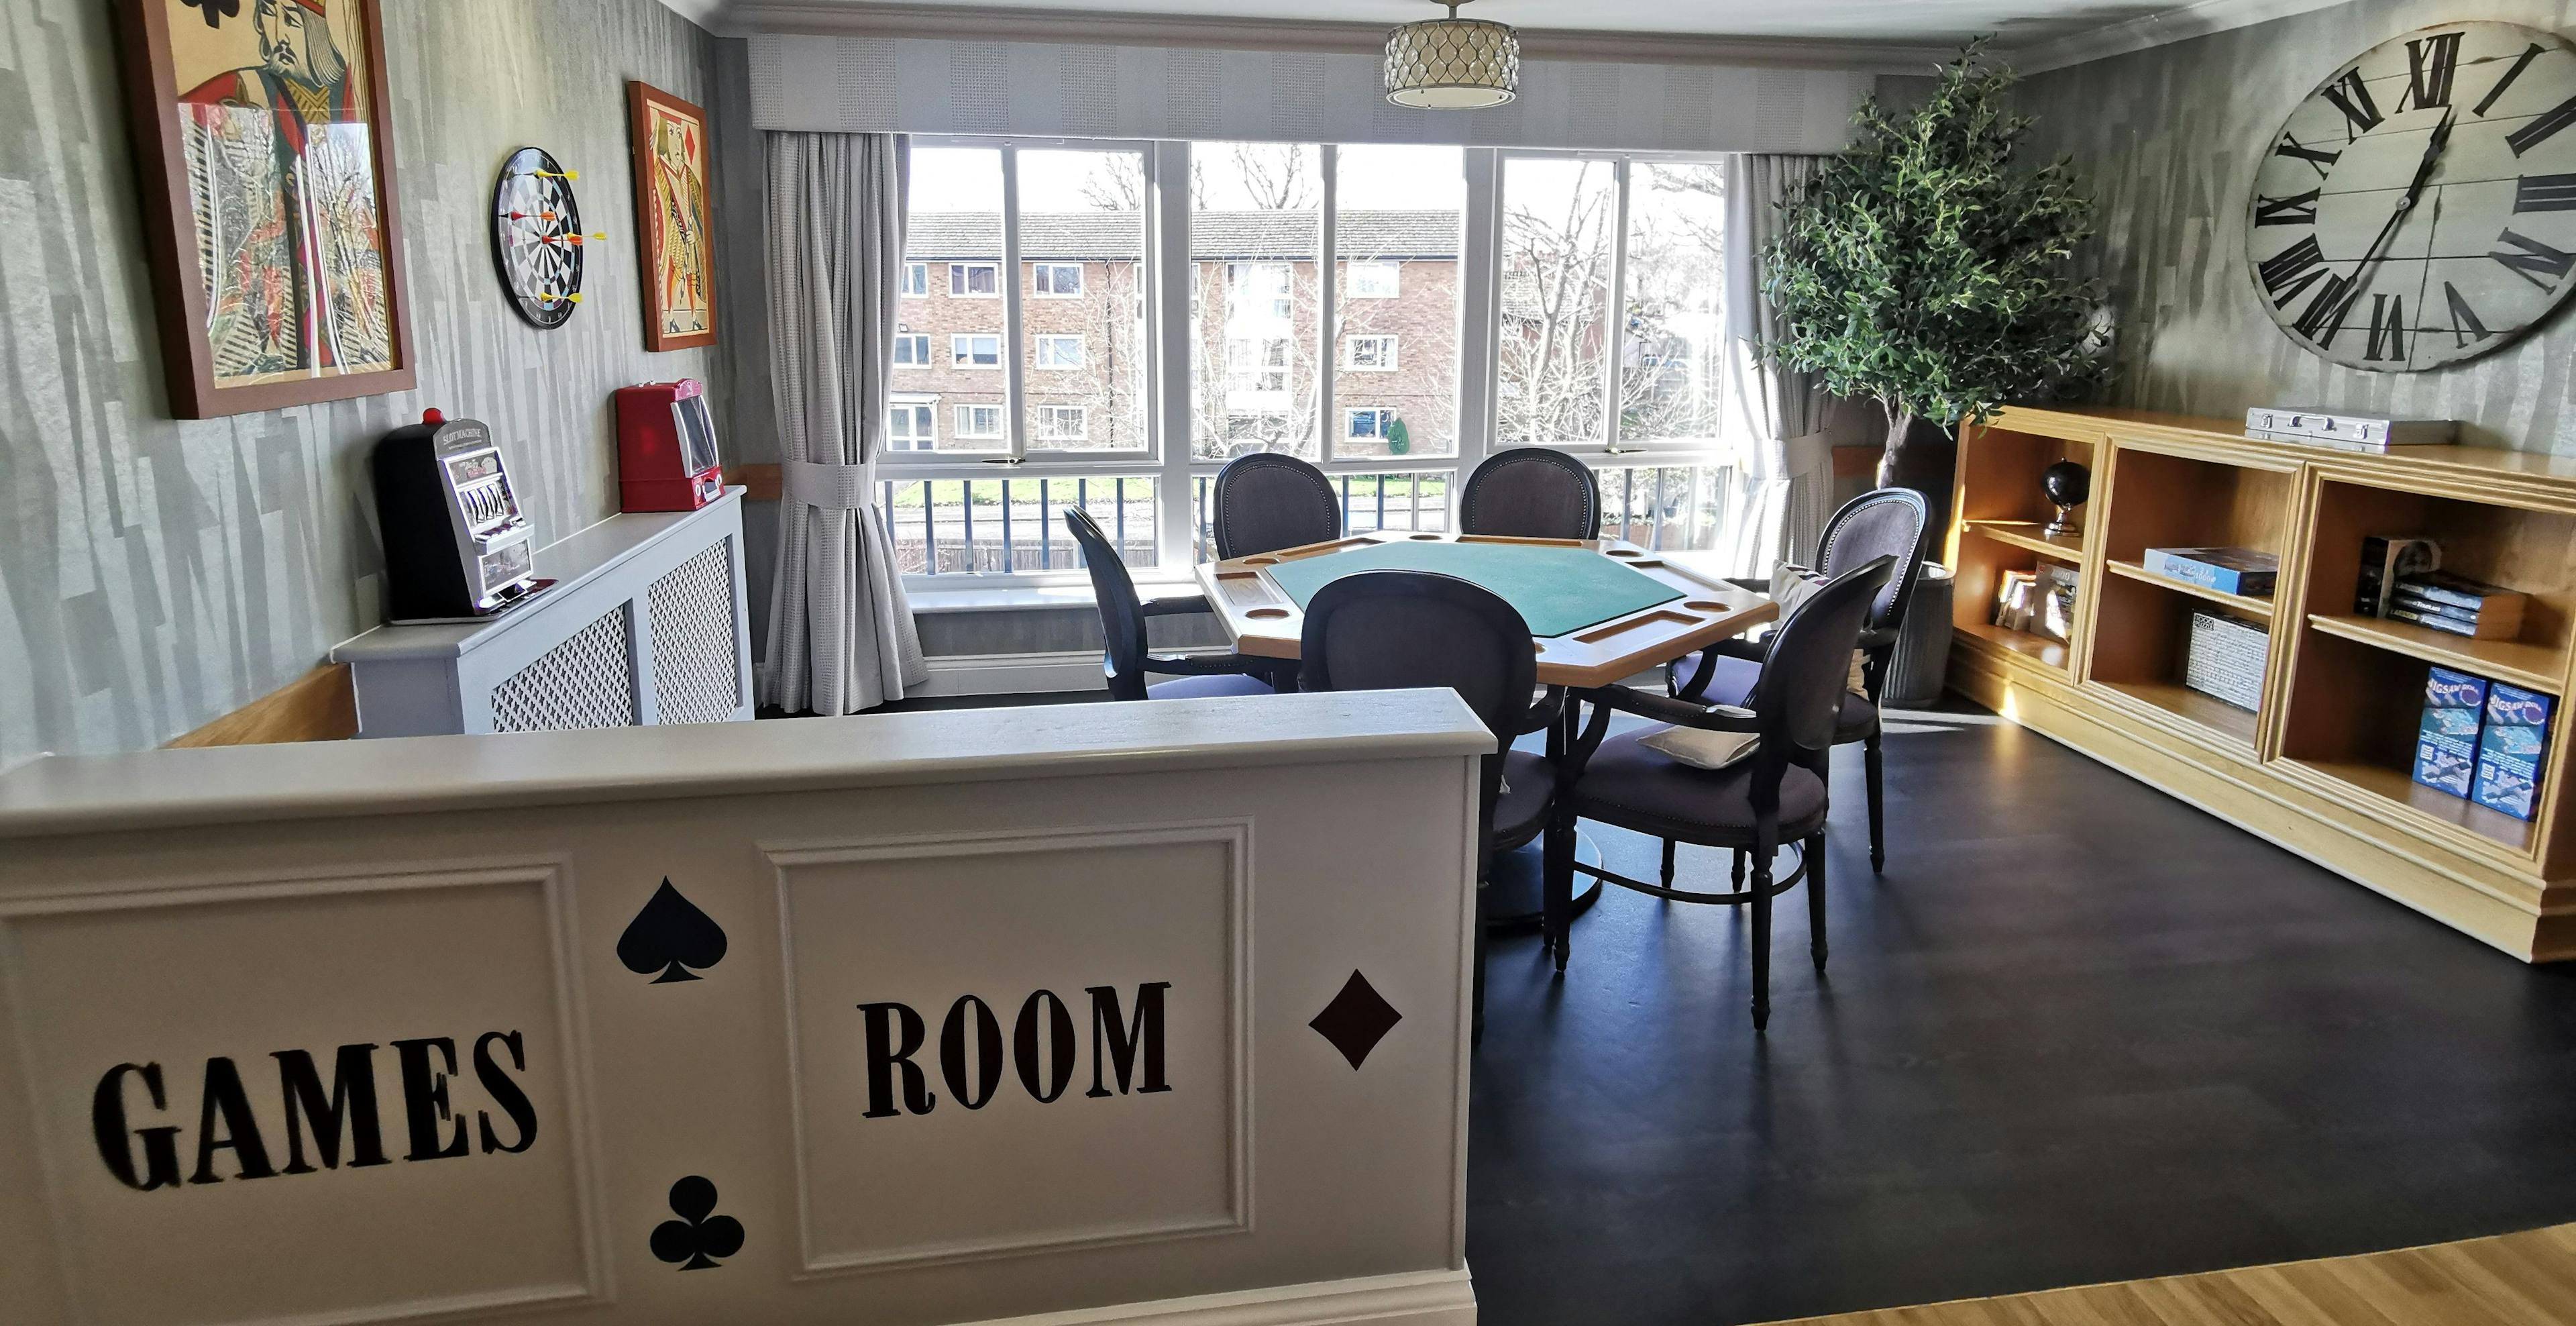 Games room of Cuffley Manor care home in Potters Bar, Hertfordshire